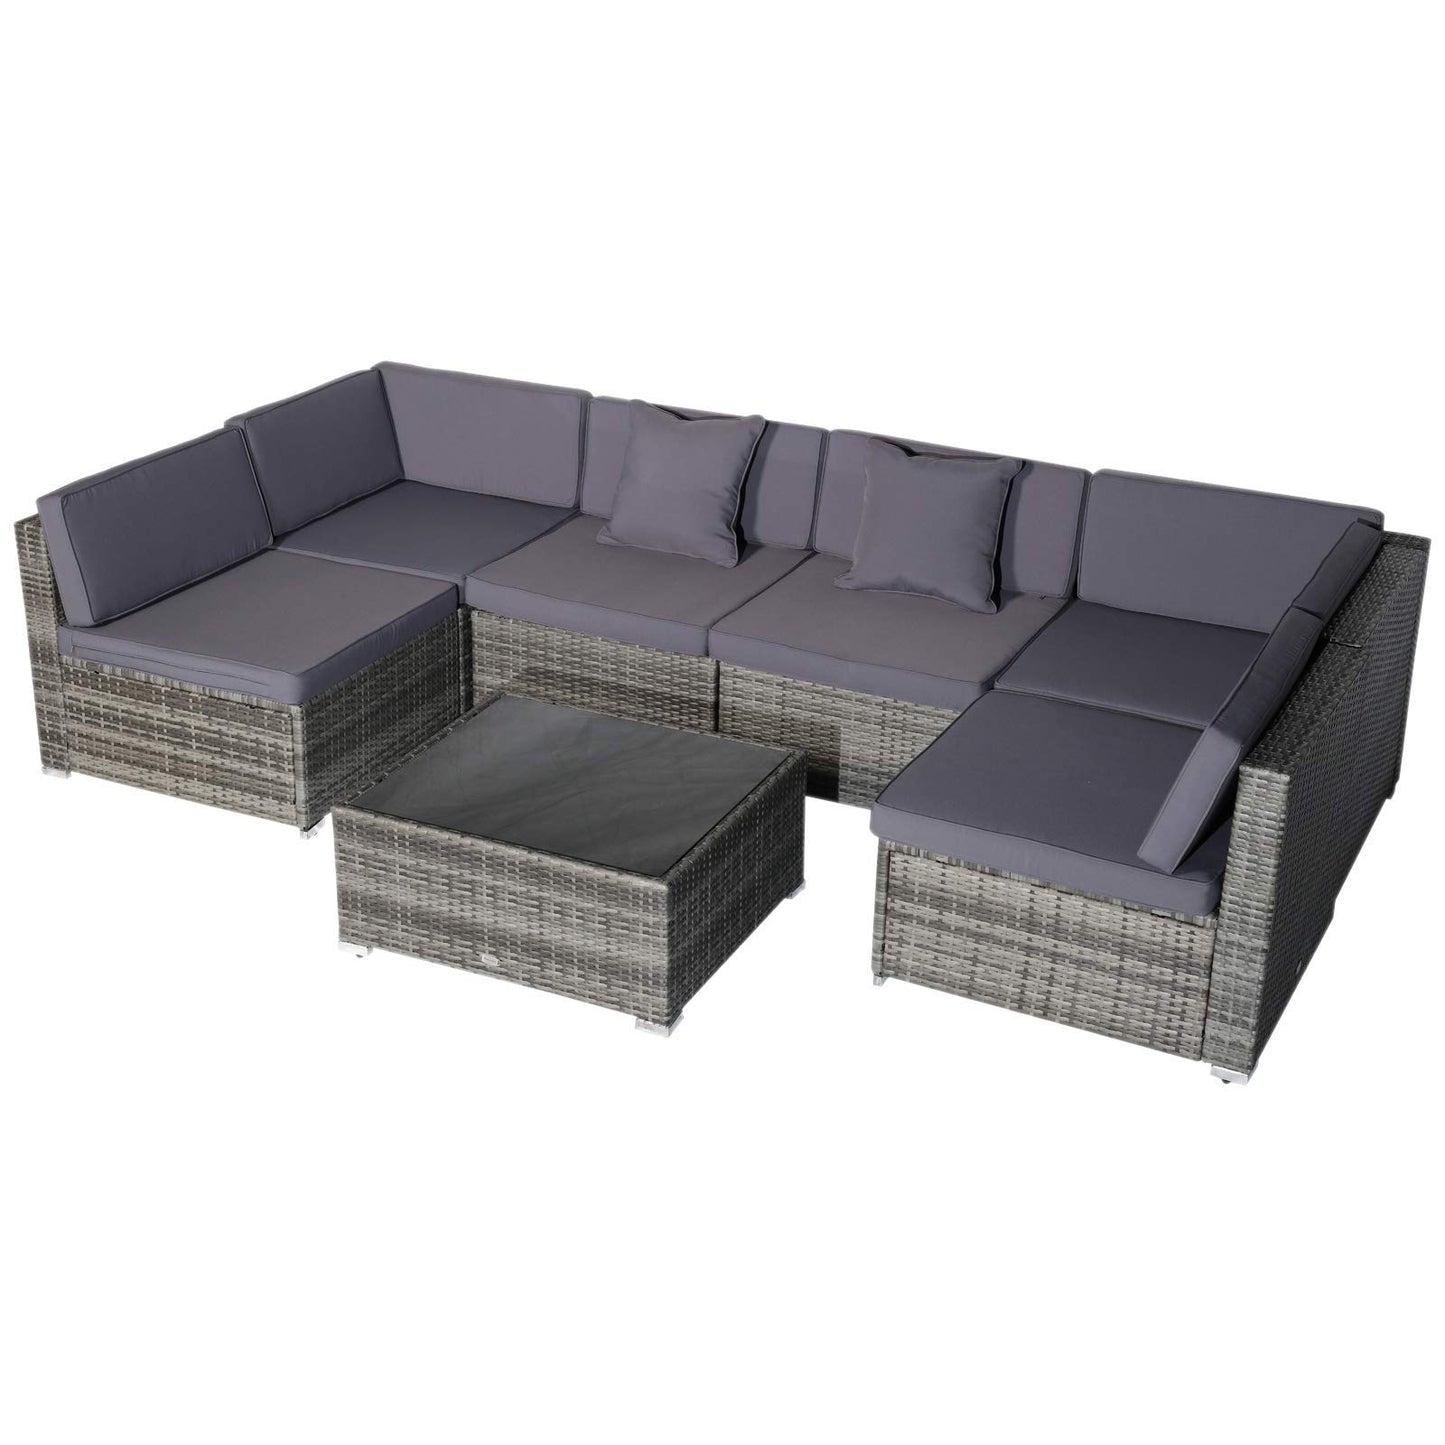 Outsunny 7-Piece Patio Furniture Sets Outdoor Wicker Conversation Sets All Weather PE Rattan Sectional Sofa Set with Cushions & Tempered Glass Desktop, Grey